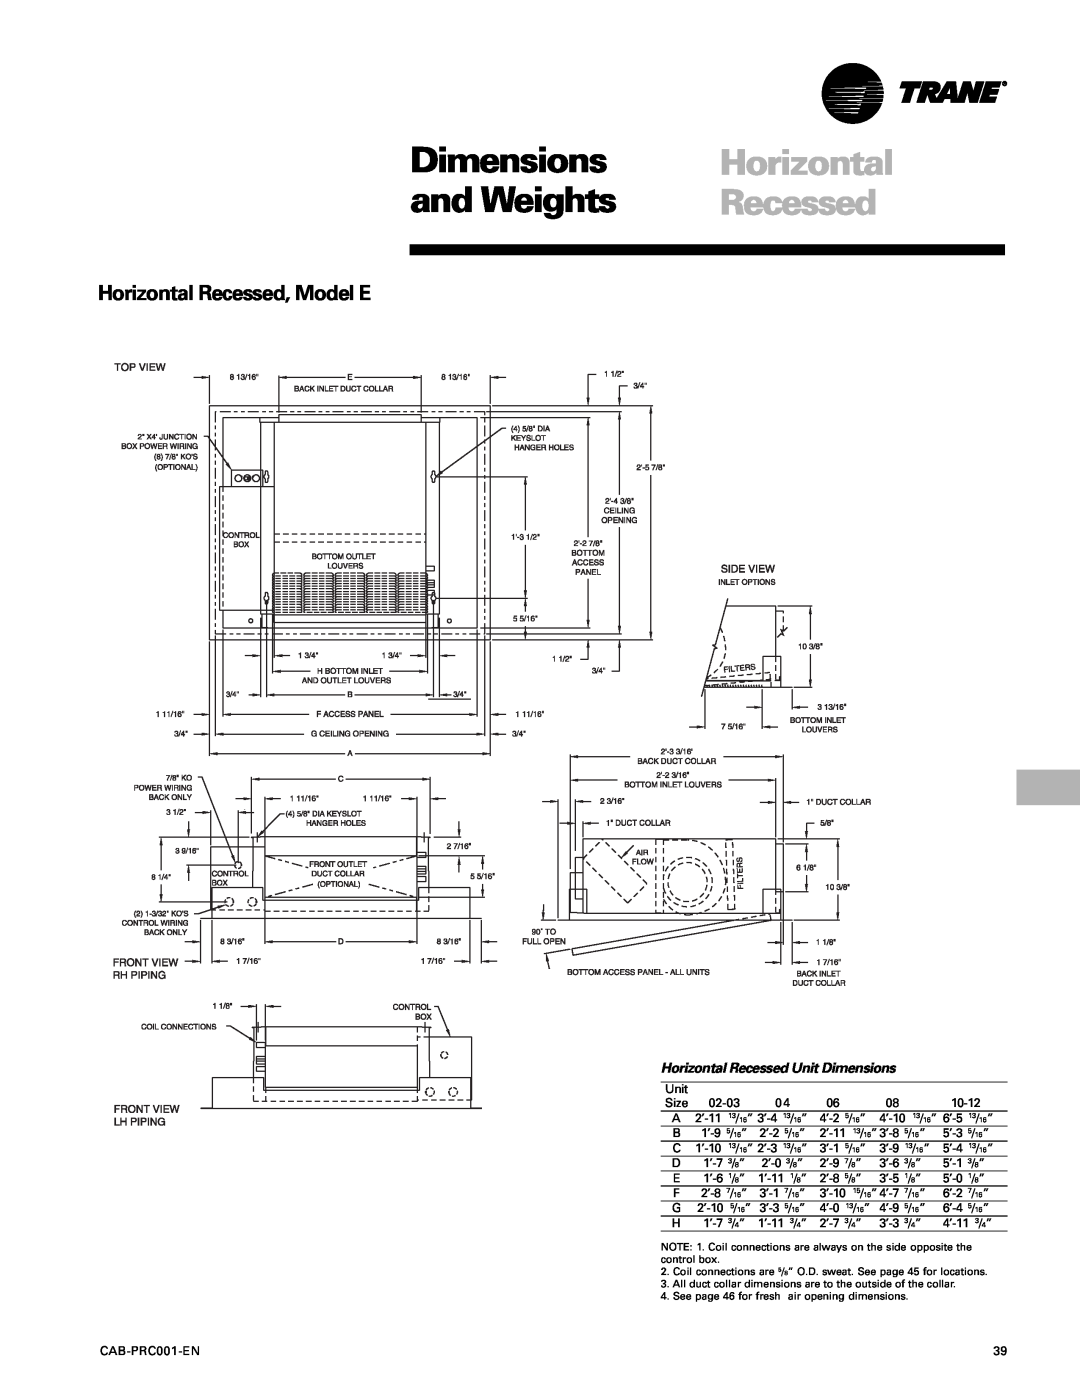 Trane CAB-PRC001-EN manual Dimensions, and Weights, Horizontal Recessed, Model E 